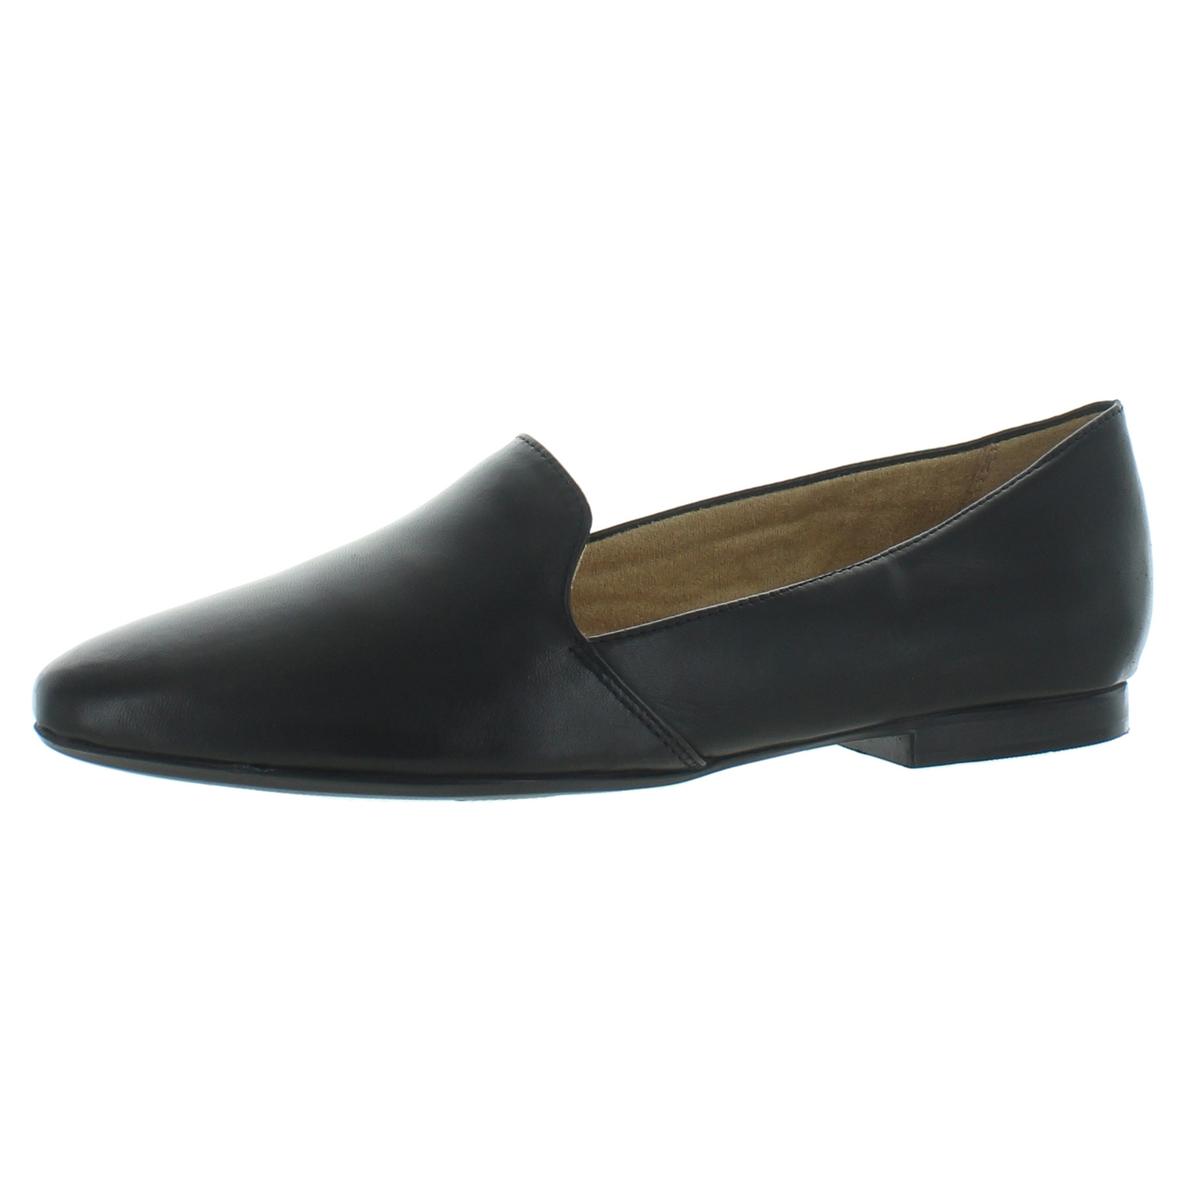 Naturalizer Caleigh Womens Leather Slip On Smoking Loafers